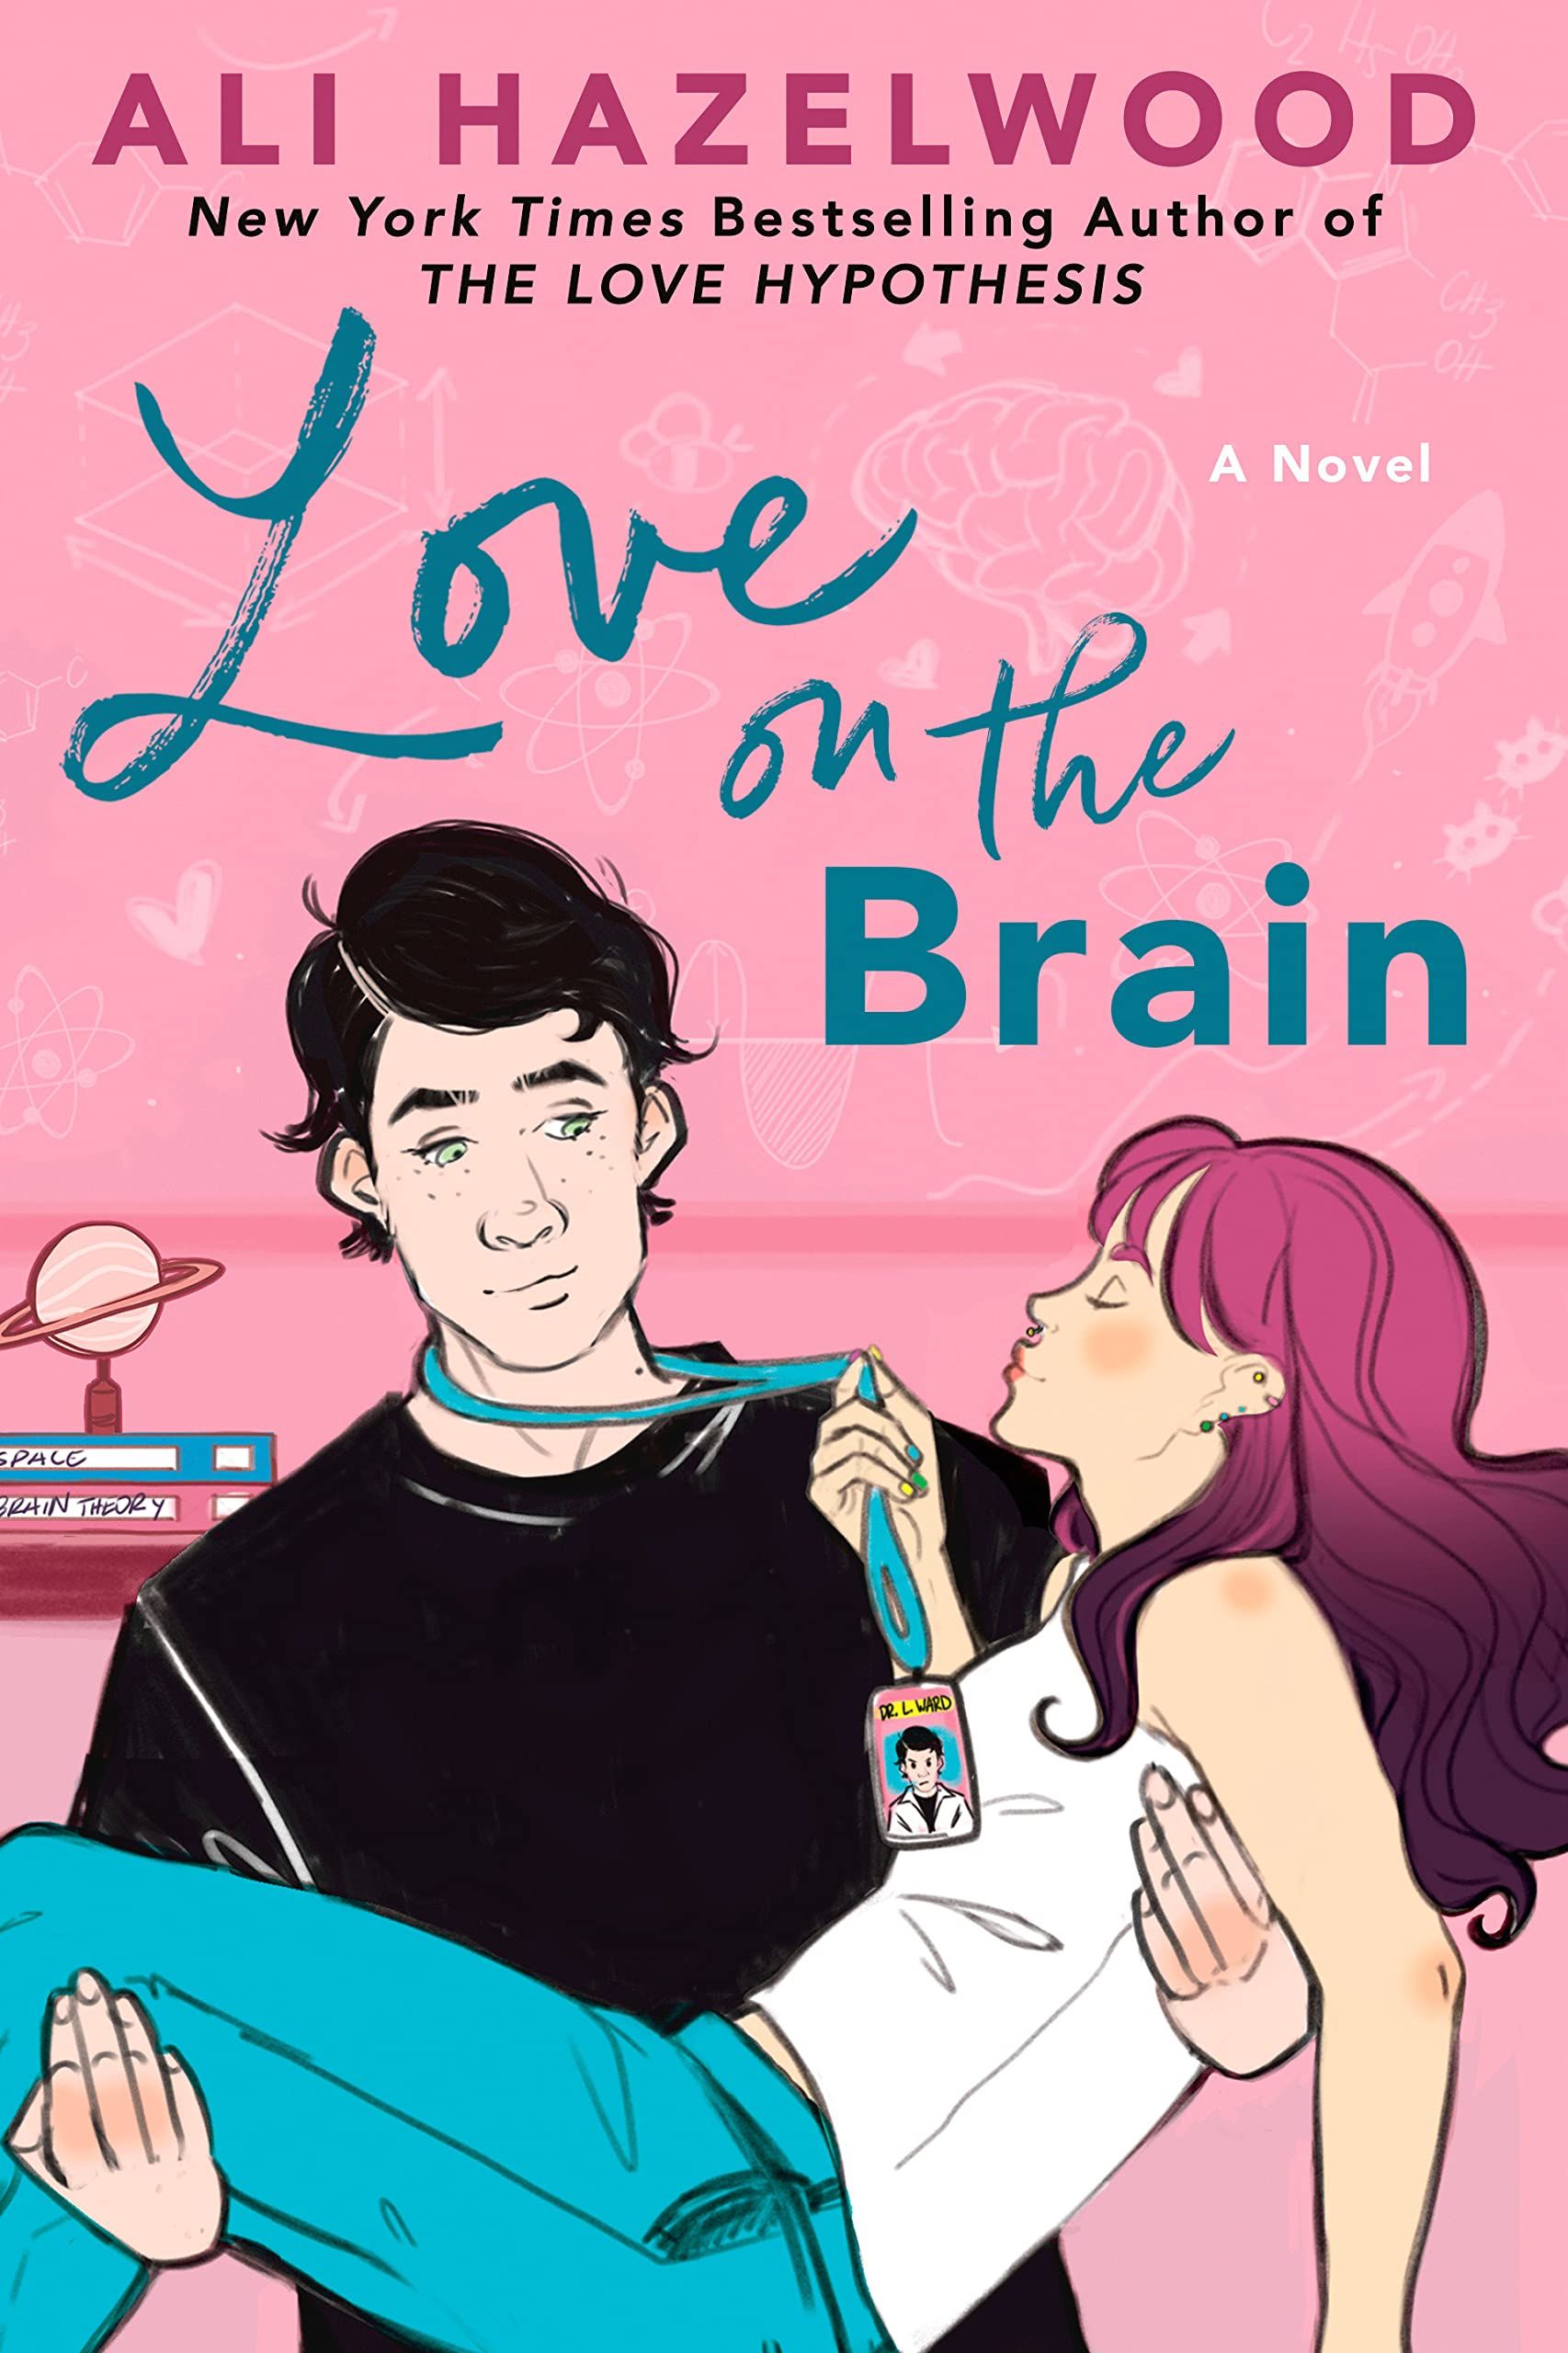 Book Cover of Love On the Brain by Ali Hazelwood